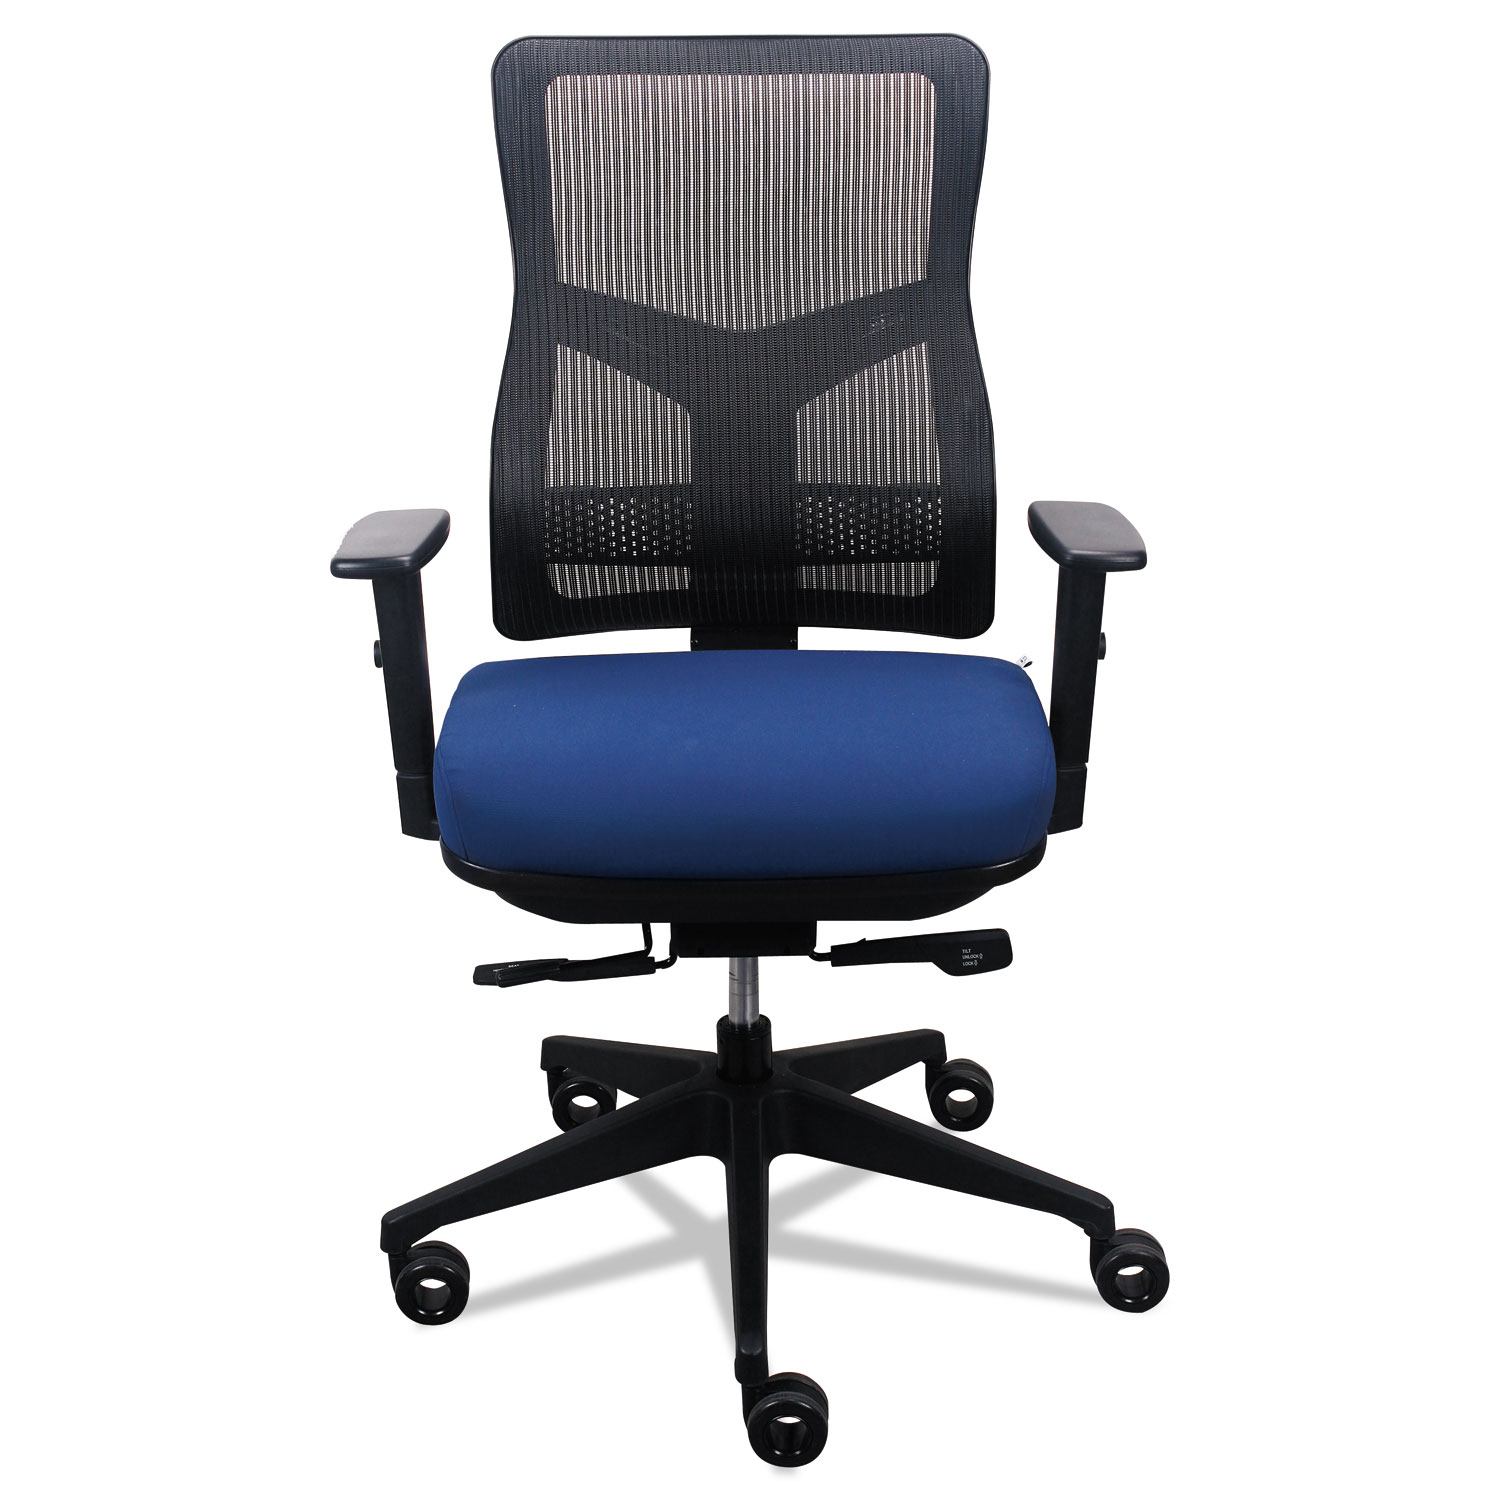 200 Mesh-Back Multifunction Chair, Supports up to 250 lbs., Navy Seat/Black Back, Black Base